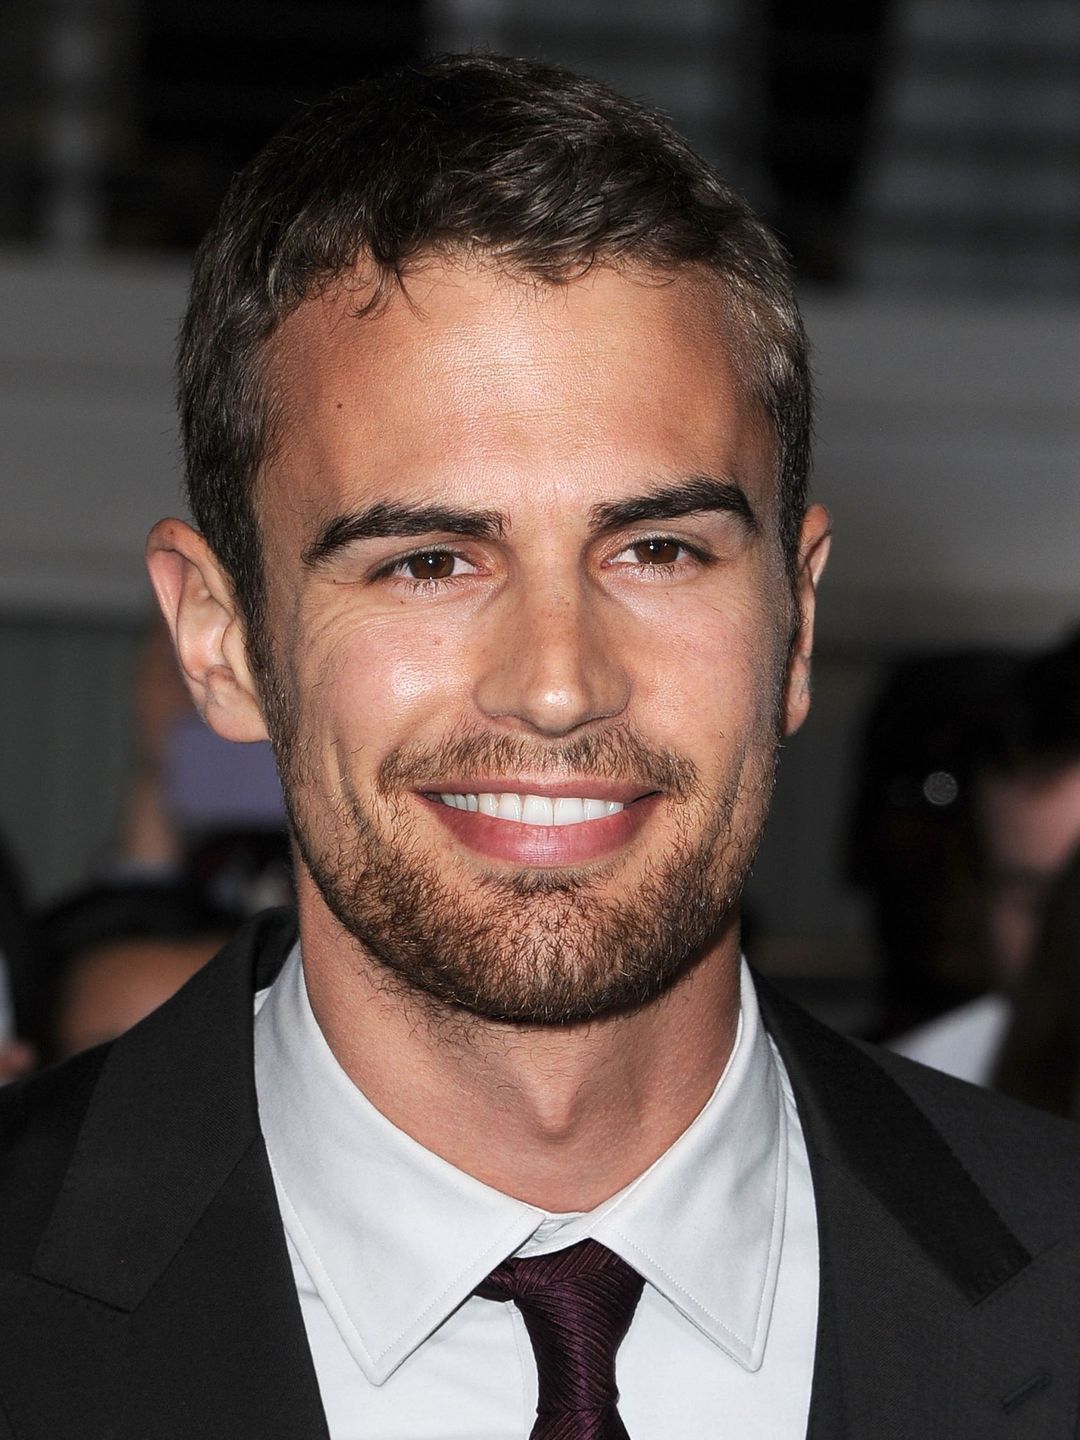 Theo James personal traits